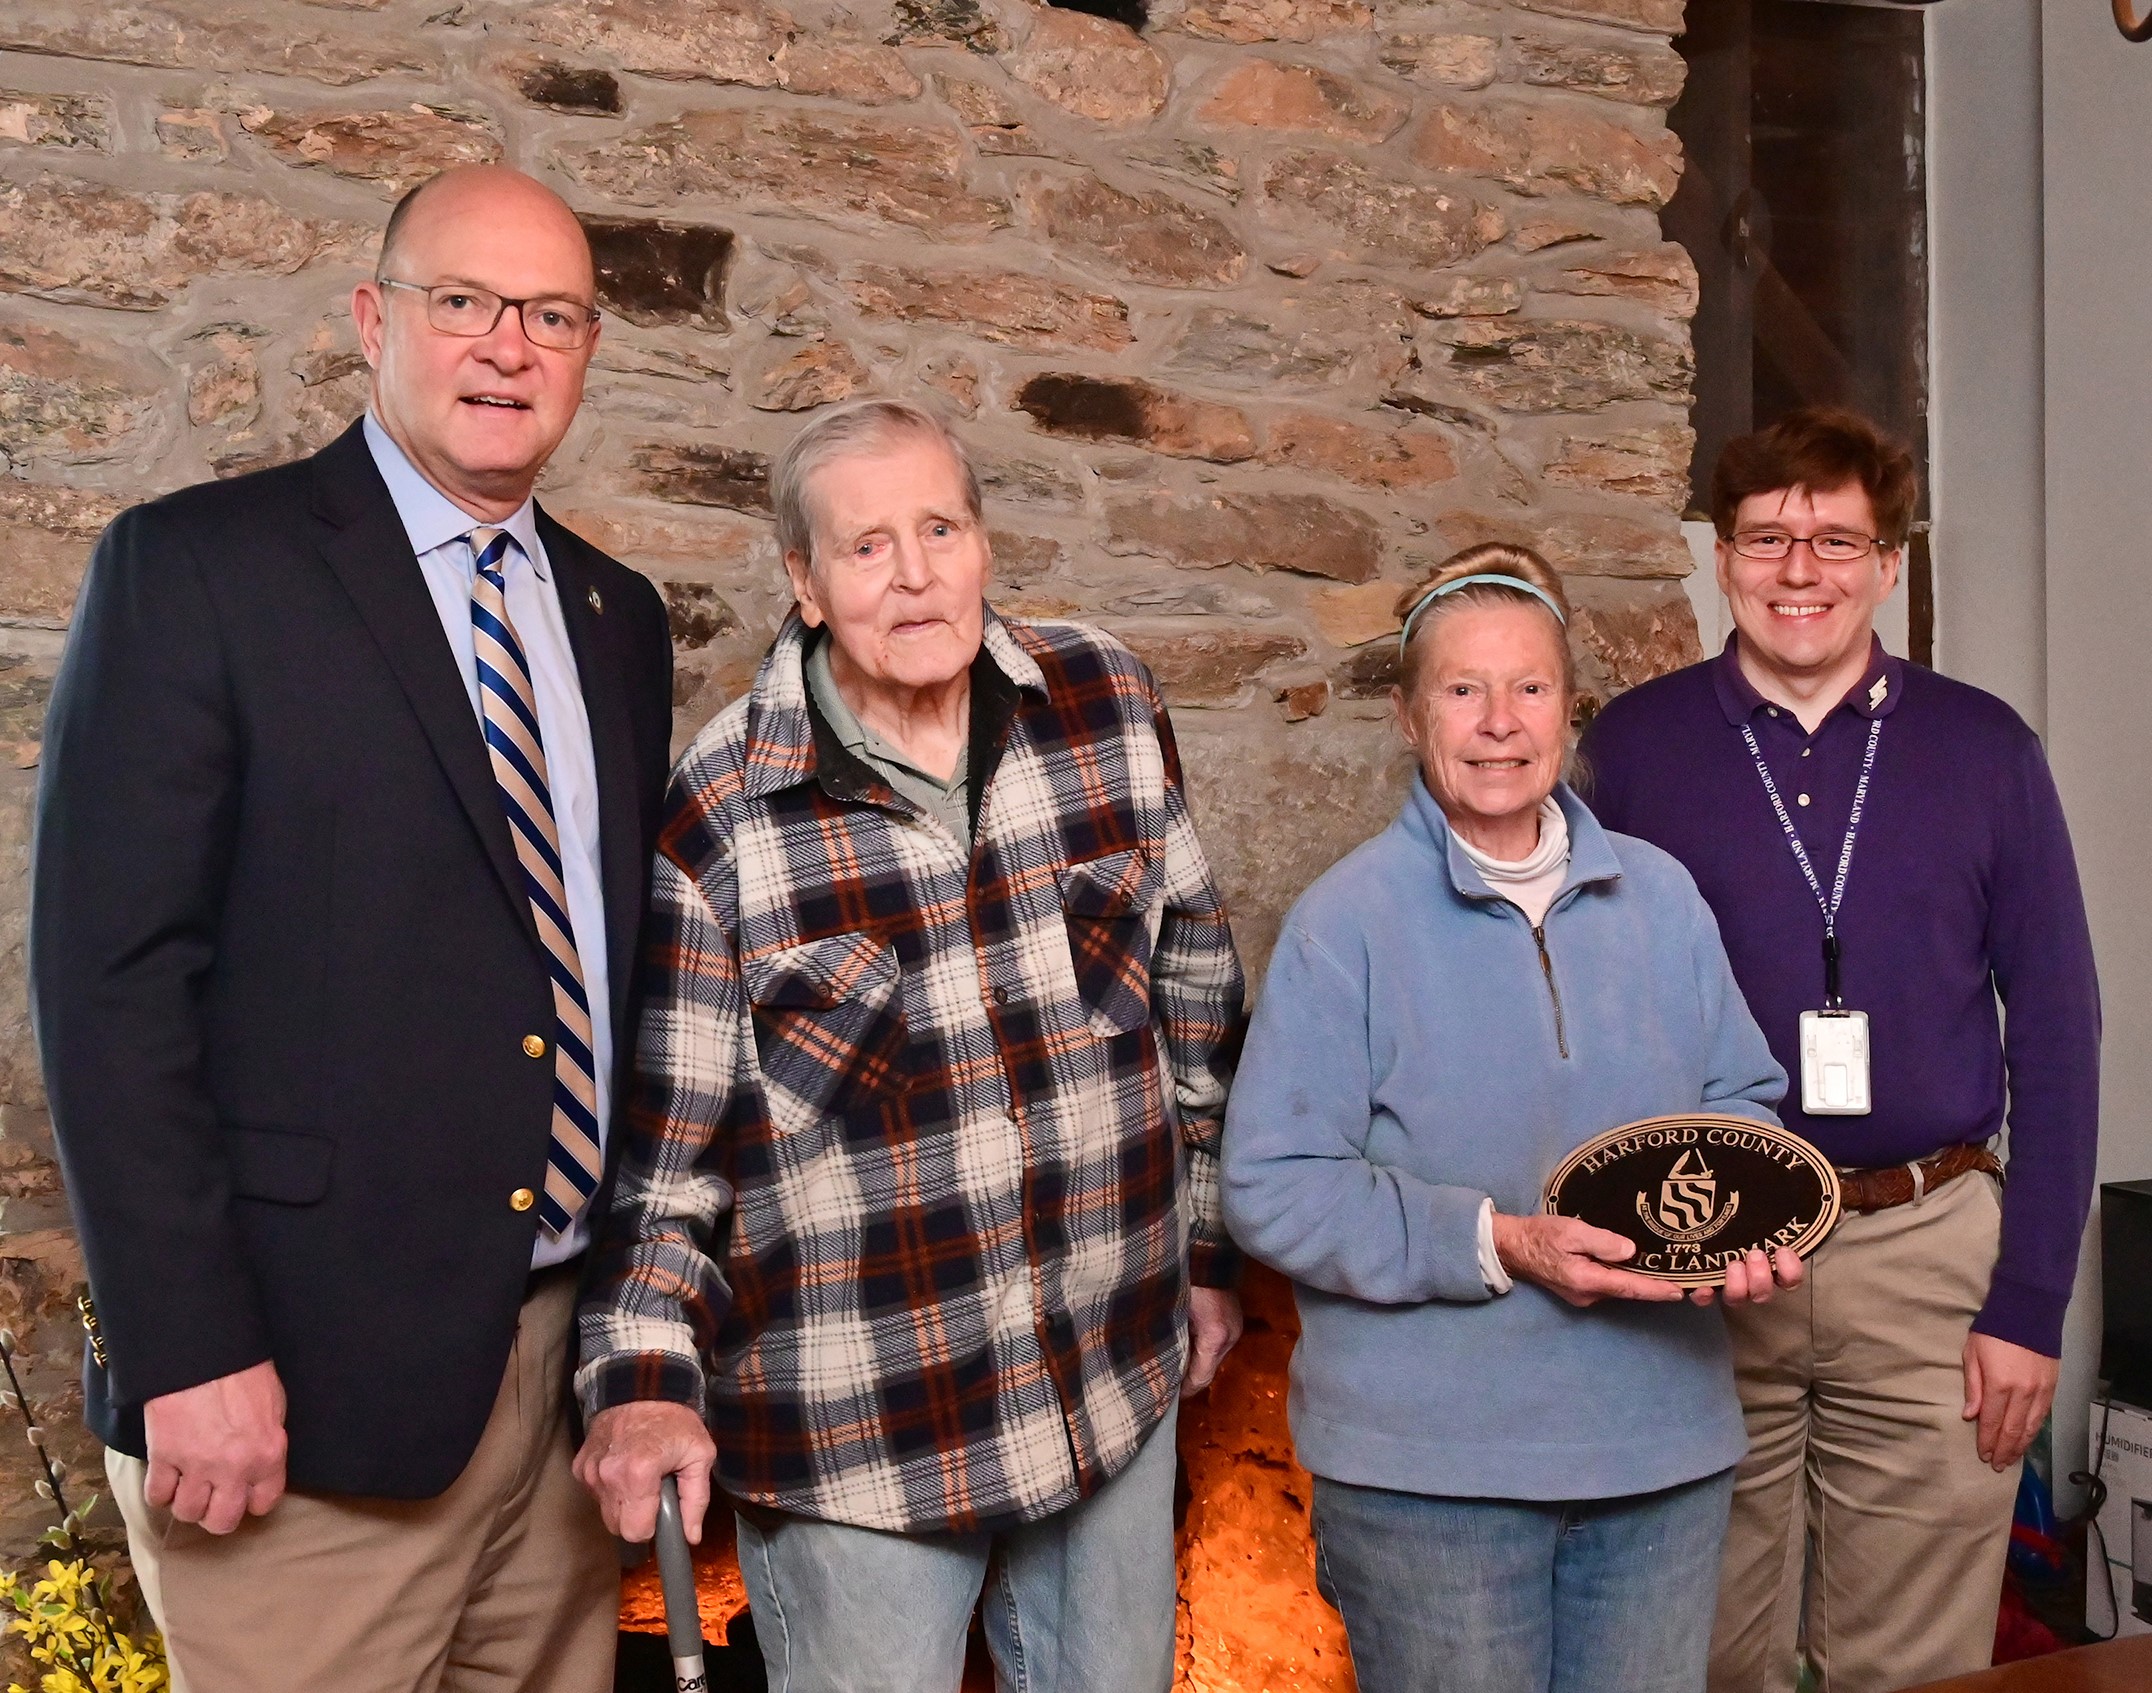 Harford County Executive Bob Cassilly, left, and Historic Preservation Planner Jacob Bensen, right, present Friendship Farm owners, Francis and Patricia Smith with a historic marker plaque to be displayed on their home during their visit to the farm Tuesday, November 21.